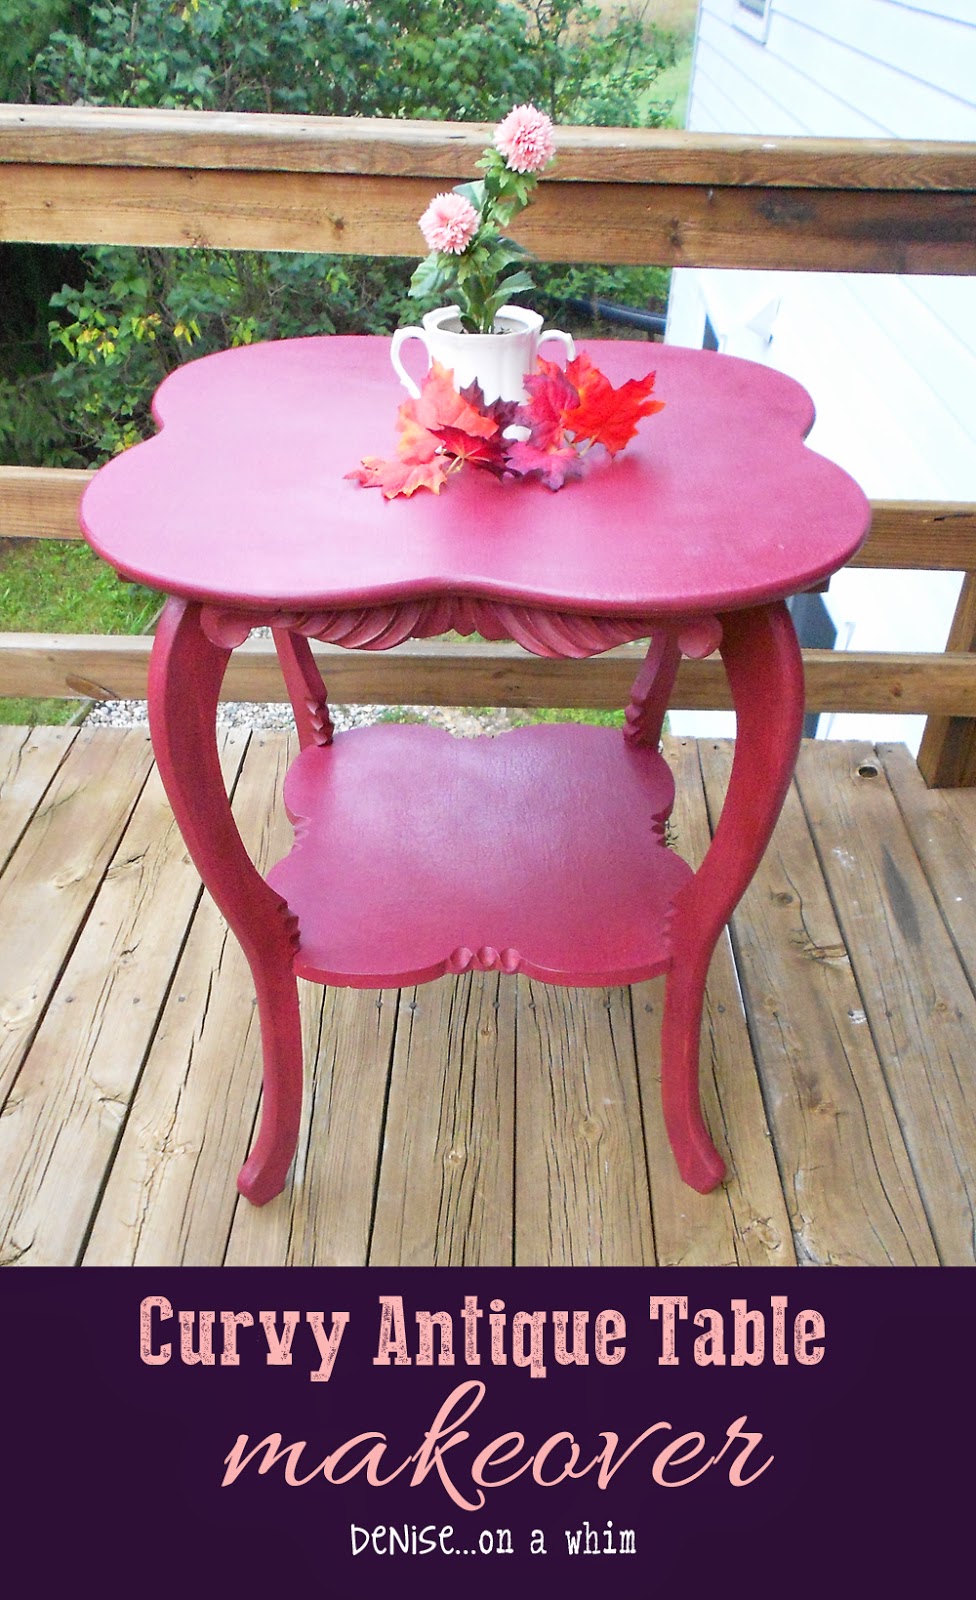 Curvy Antique Table Makeover from Denise on a Whim